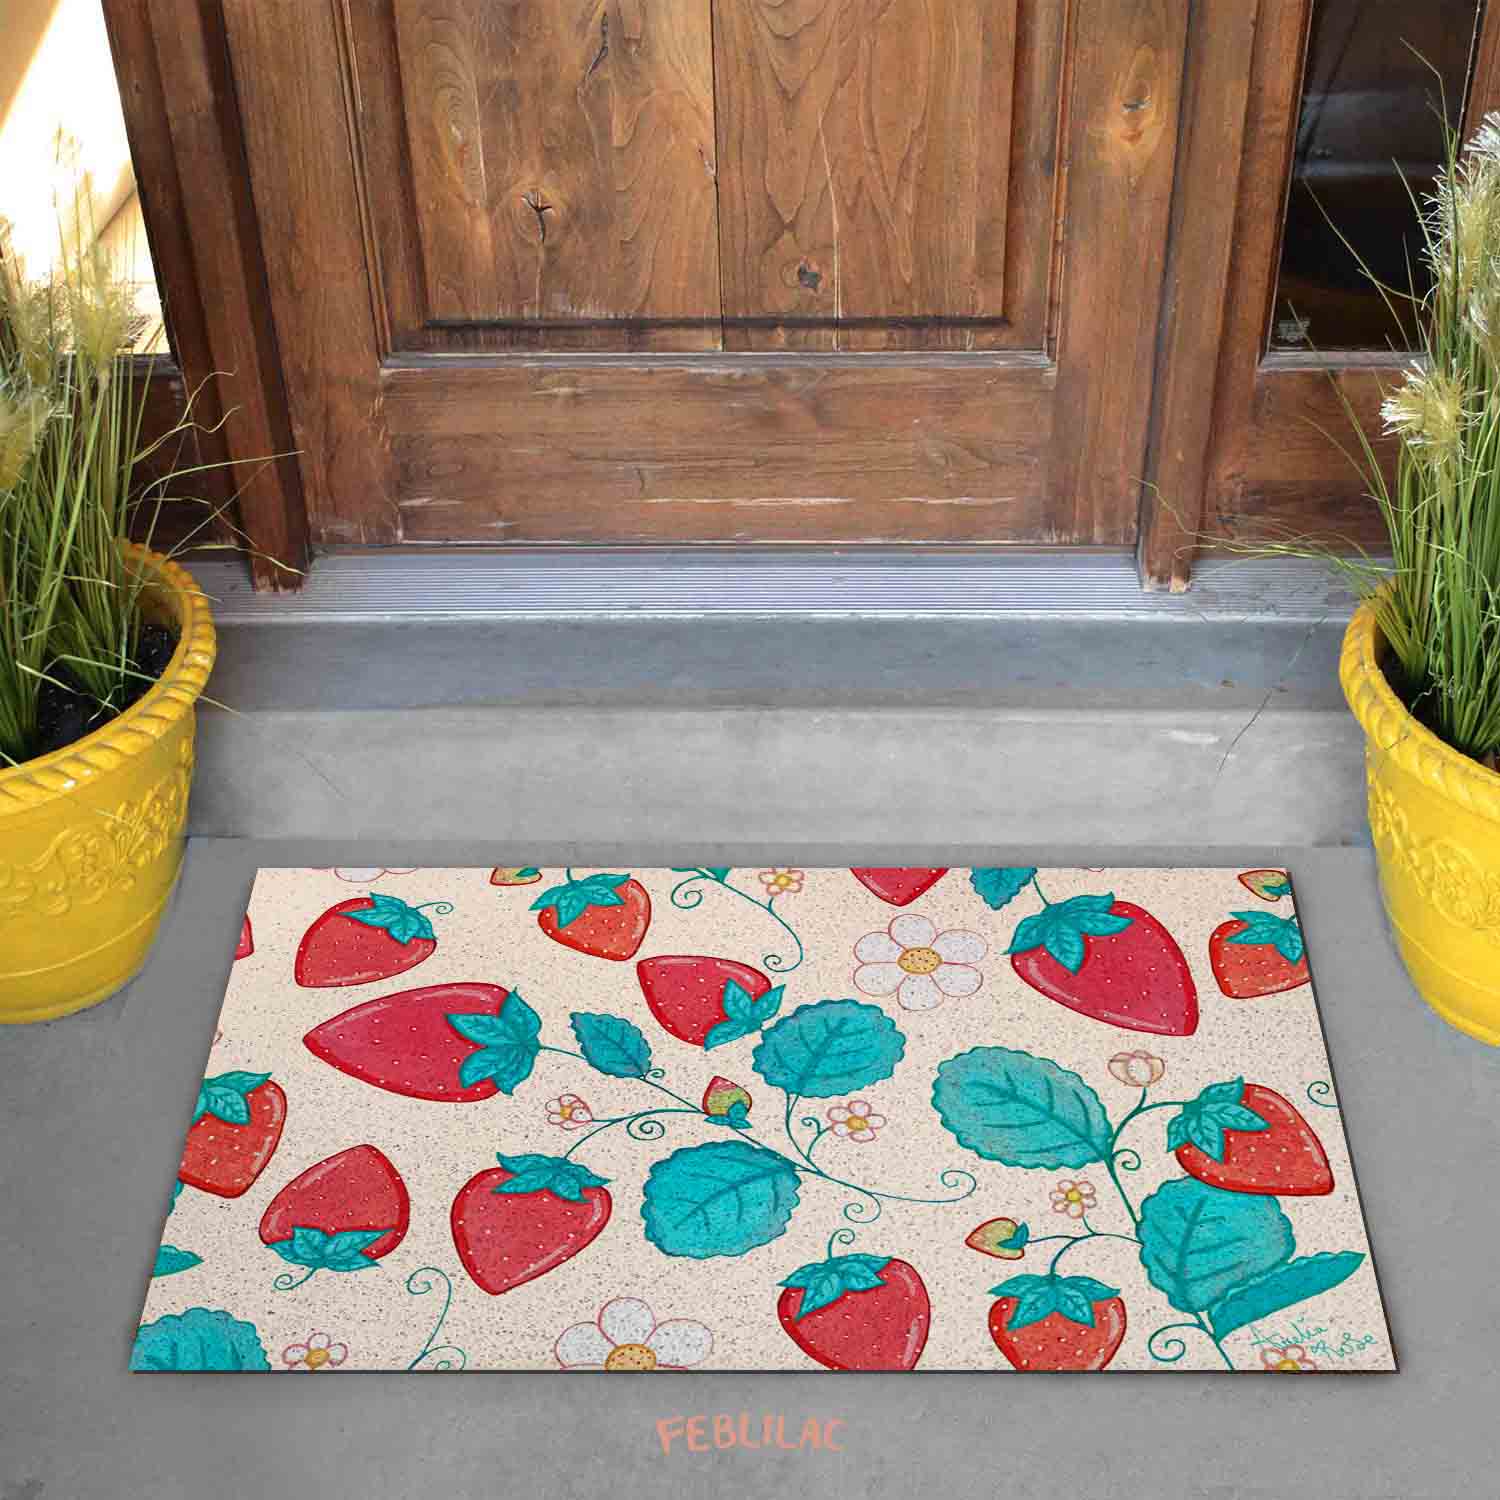 Feblilac Strawberries and Cream PVC Coil Door Mat by AmeliaRose Illustrations from UK